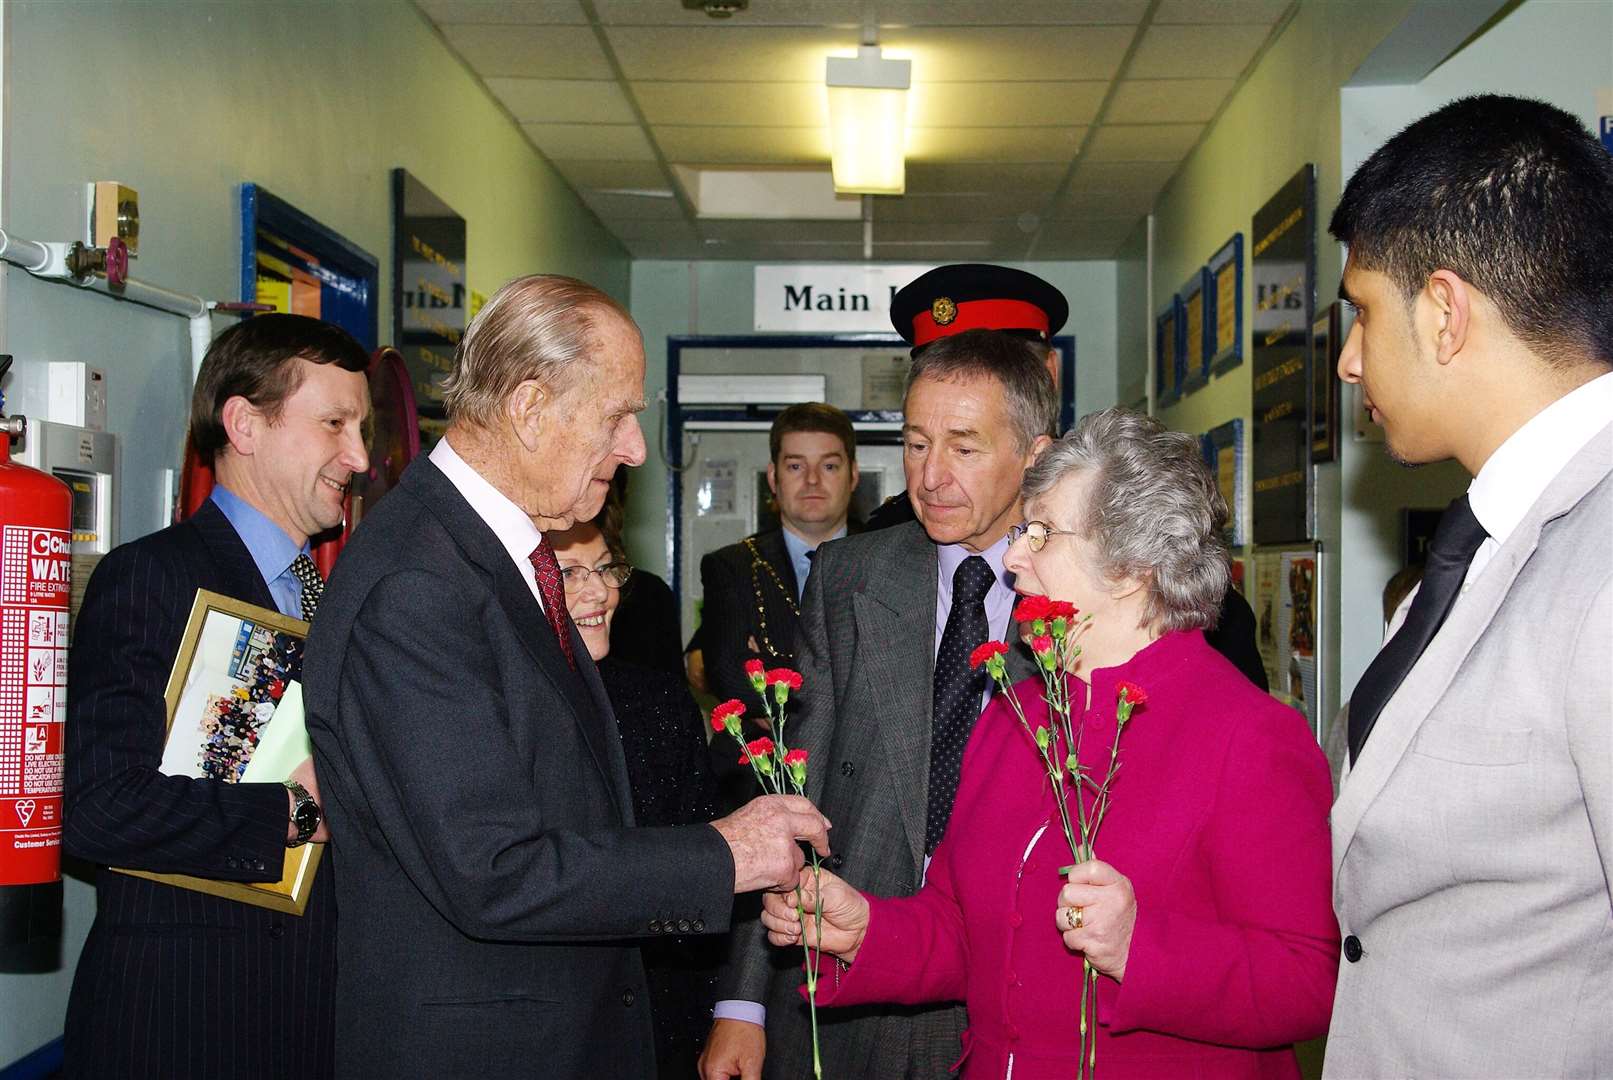 Ann Hart (second right) at the Prince Philip Centre in Leeds when the Duke of Edinburgh visited in 2011 (Ann Hart/PA)